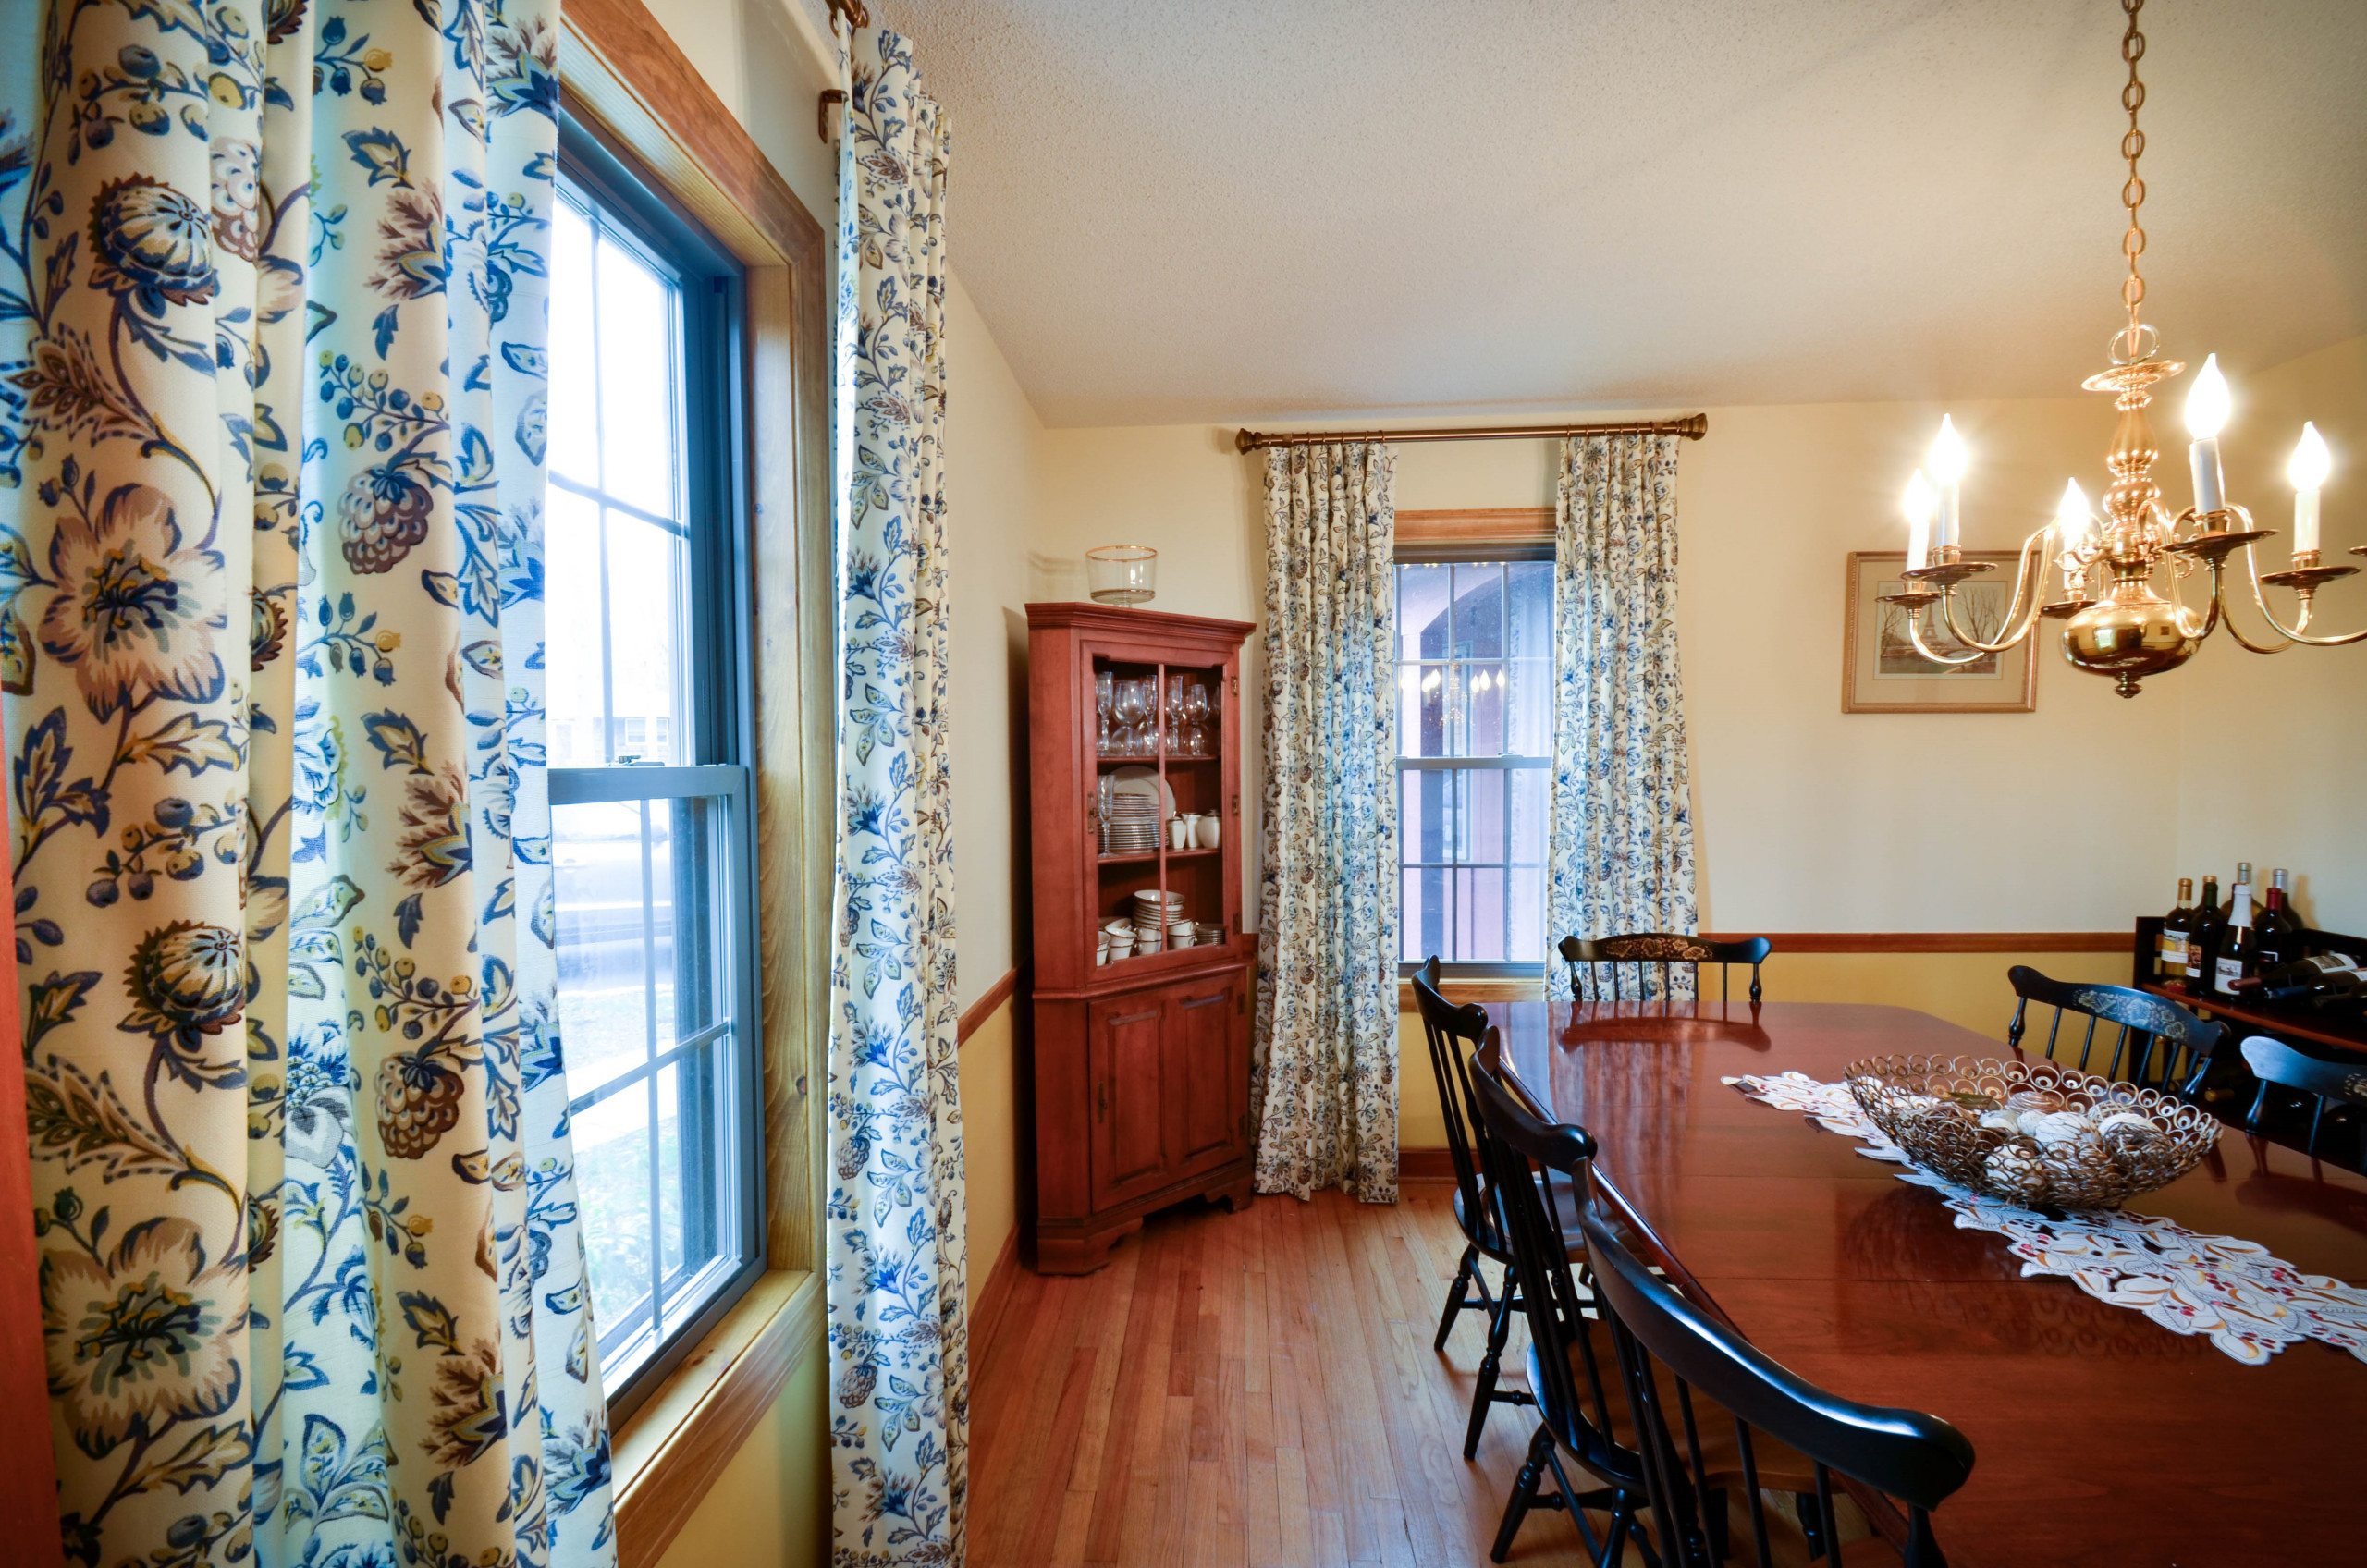 More dining room window treatments in Connecticut